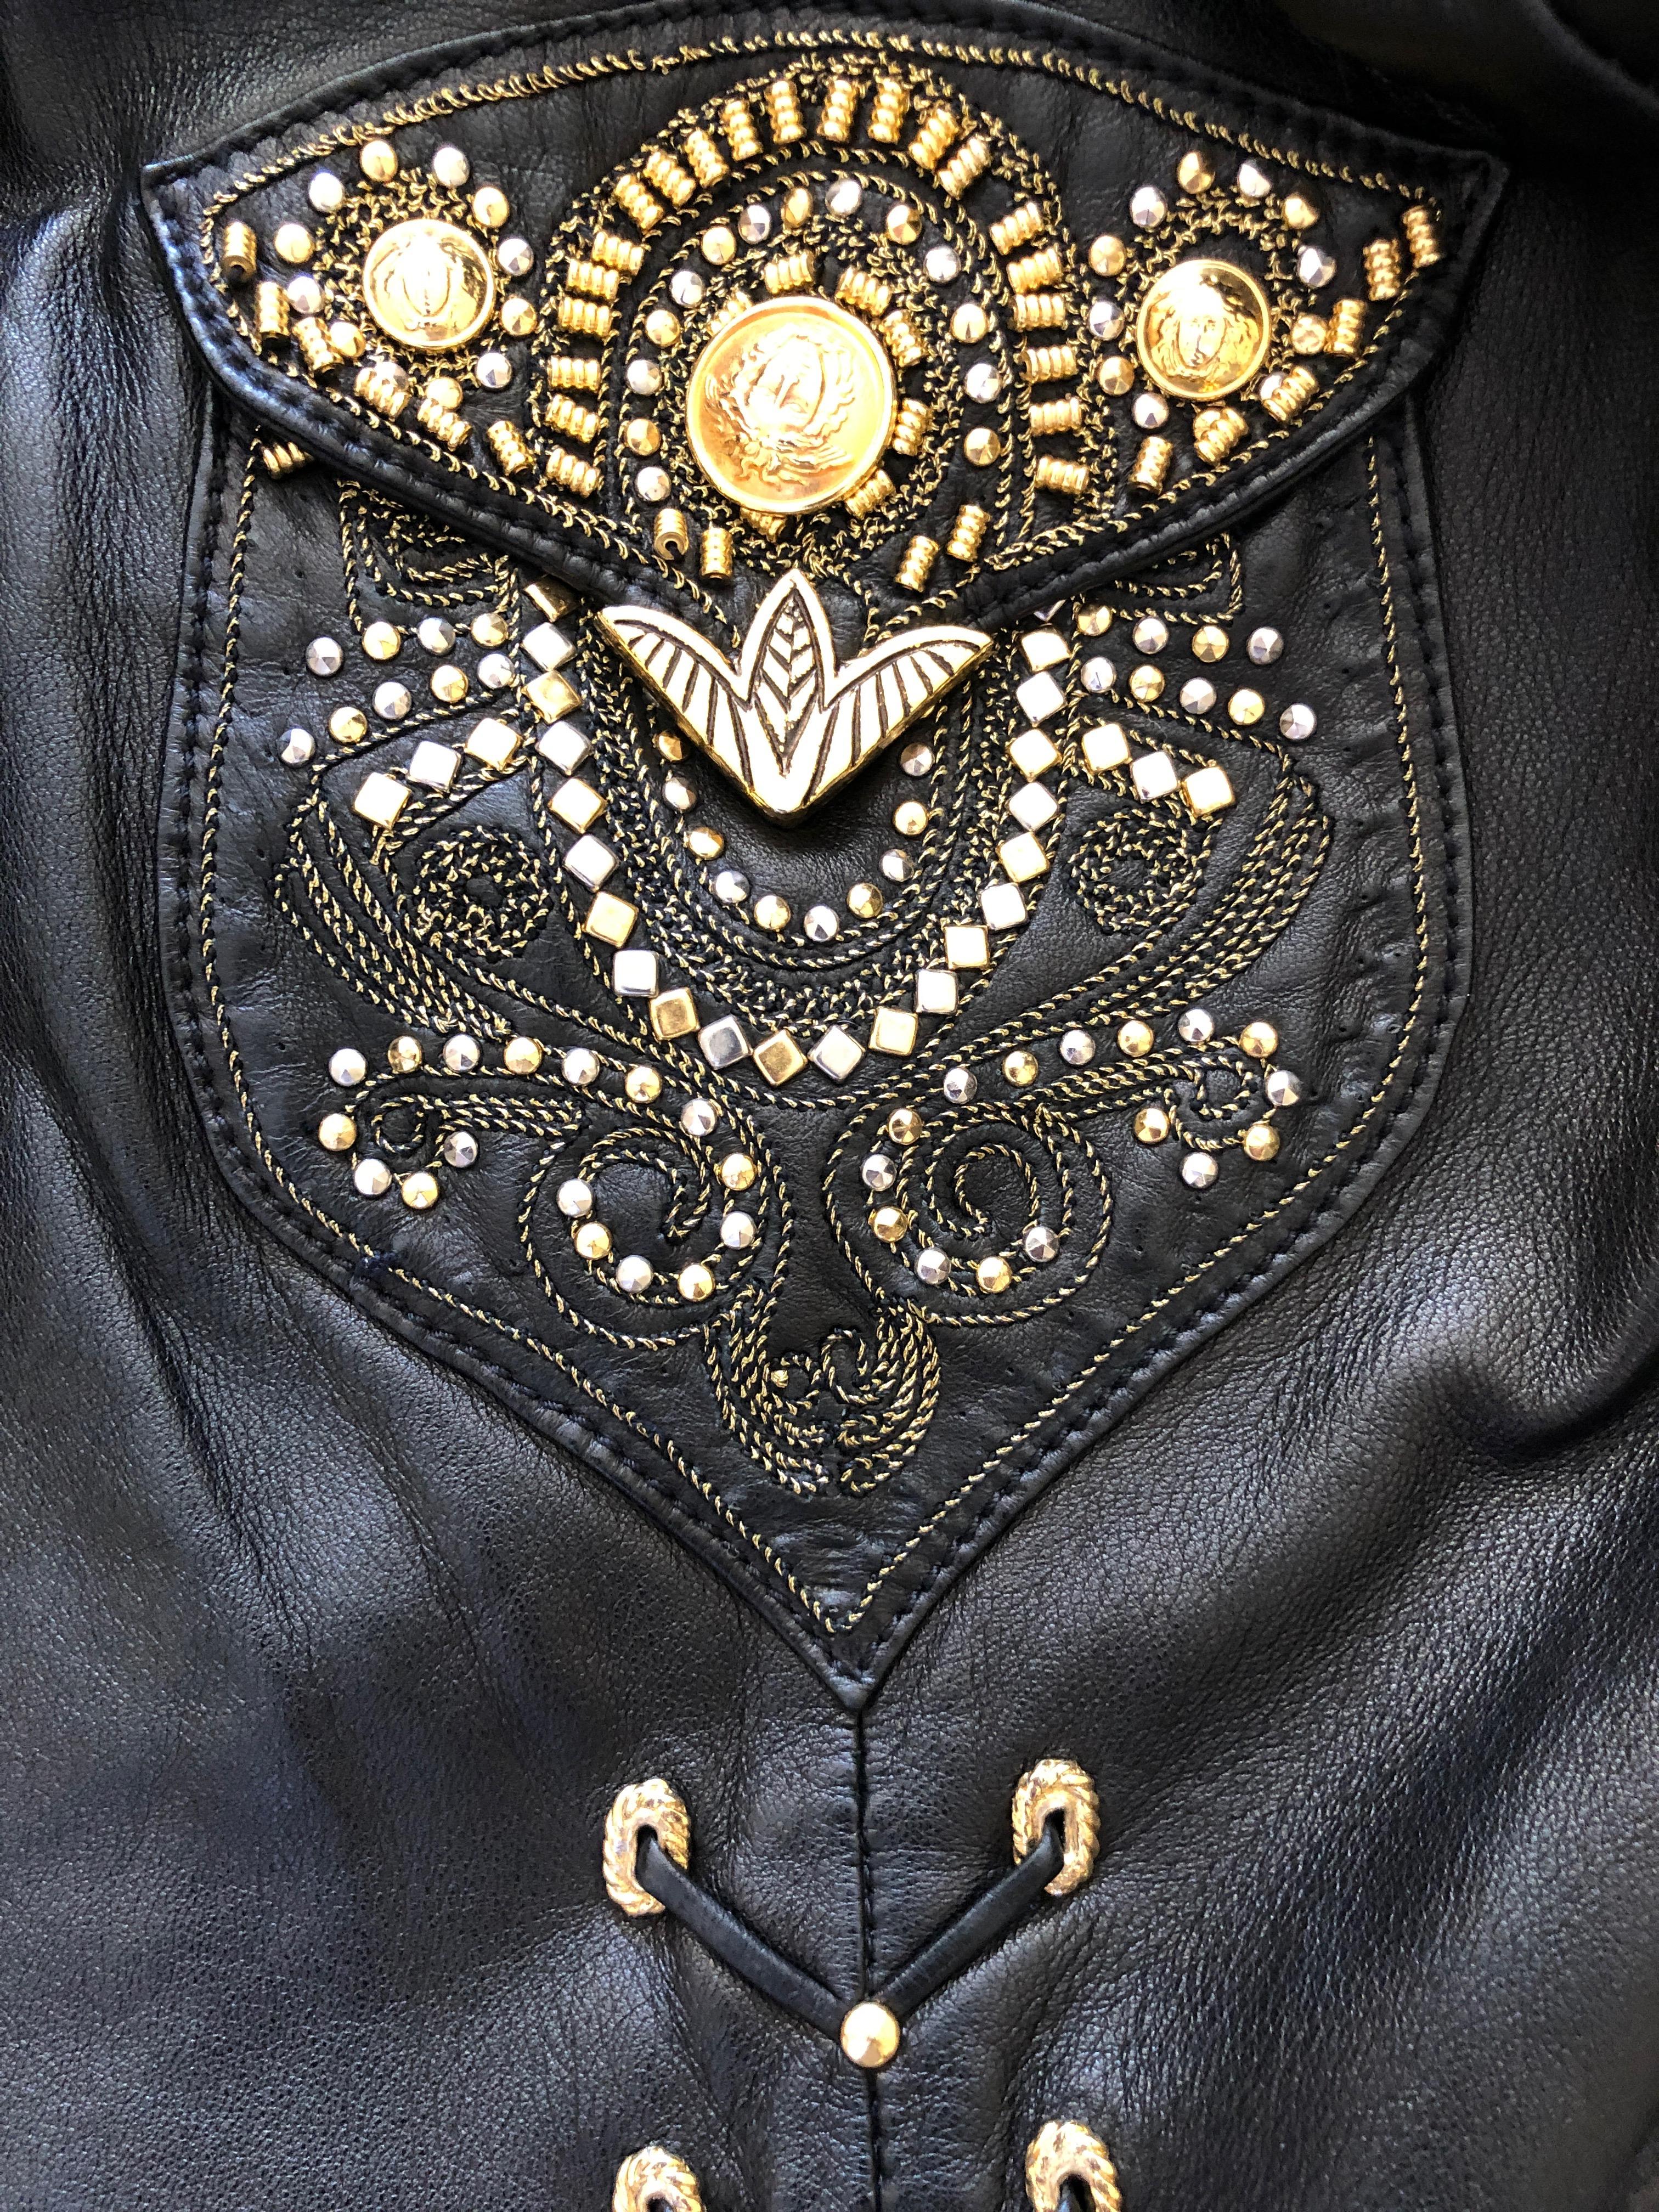 Black Gianni Versace 1990 Lambskin Leather Moto Jacket with Gold Embellishment For Sale